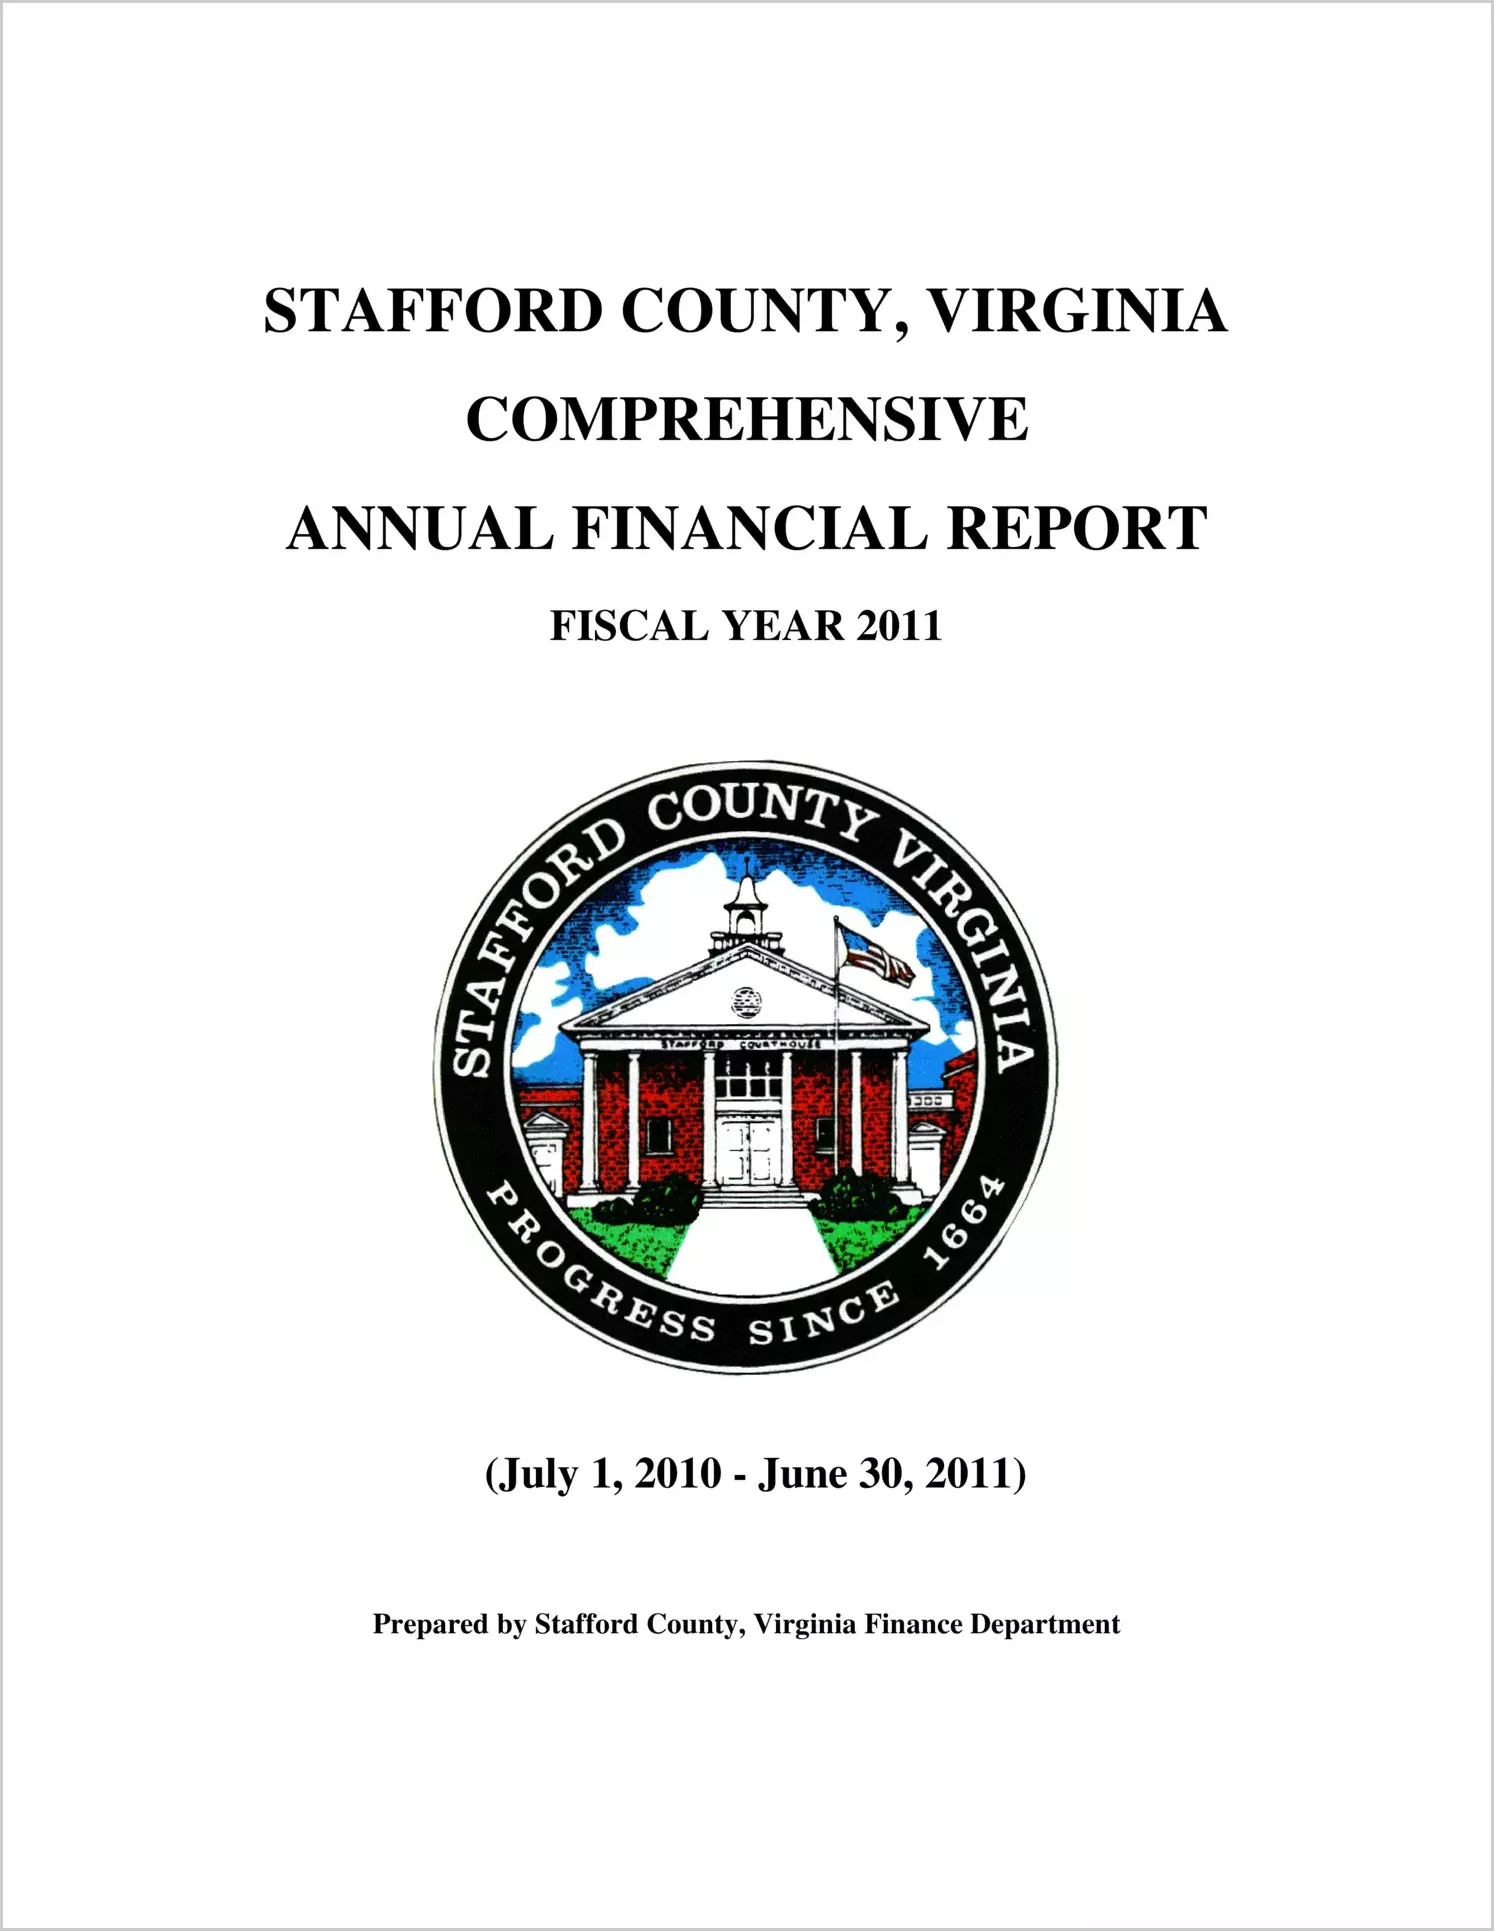 2011 Annual Financial Report for County of Stafford